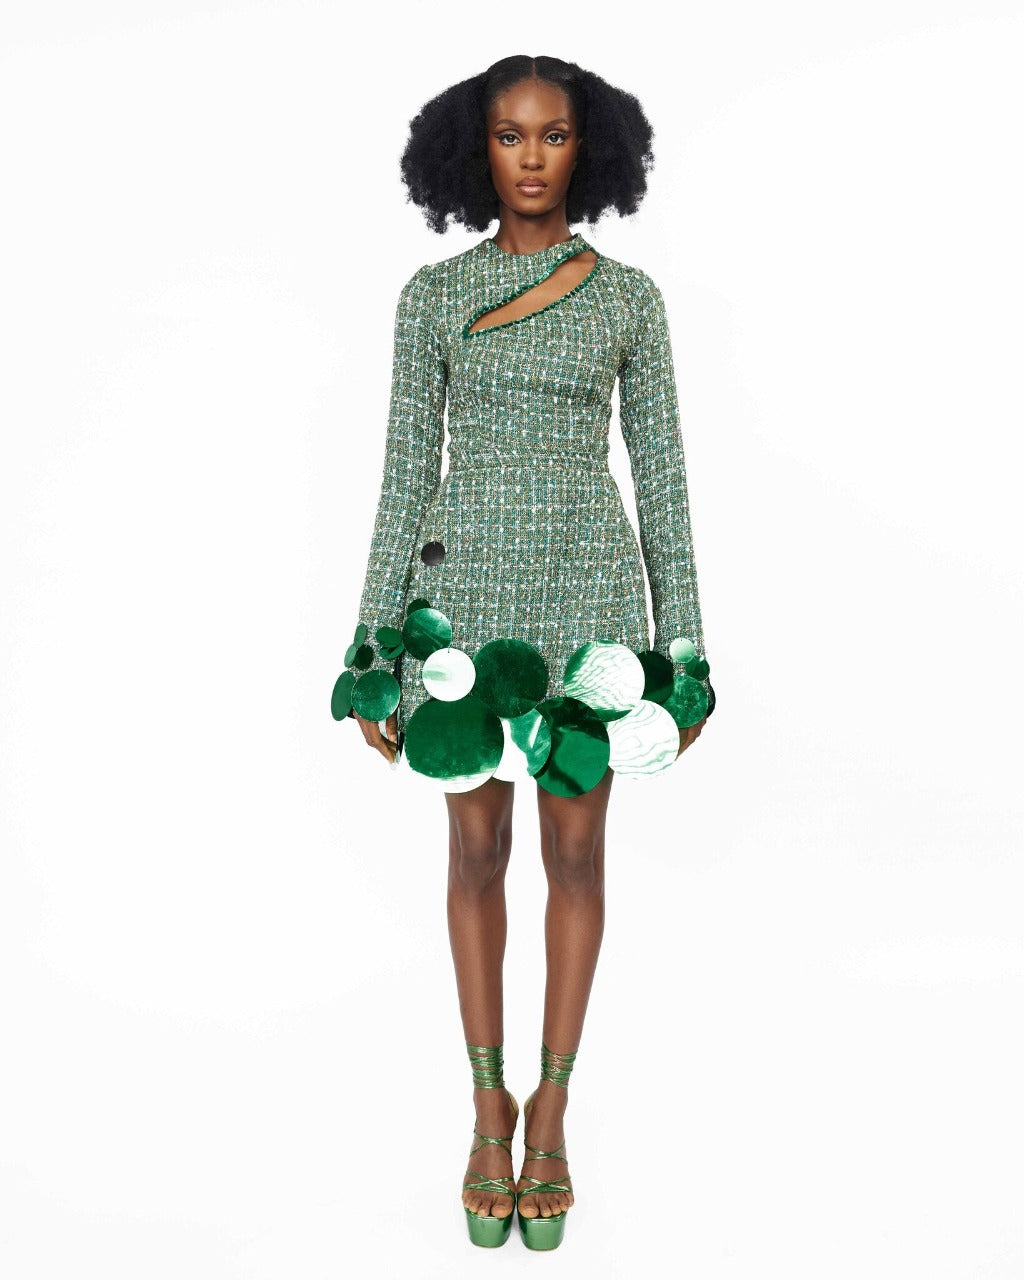 A model wearing a Green top with cut-out neckline detail and sequins embellishment at the neckline and sleeve hem, and Green high waist mini skirt with sequins embellishment